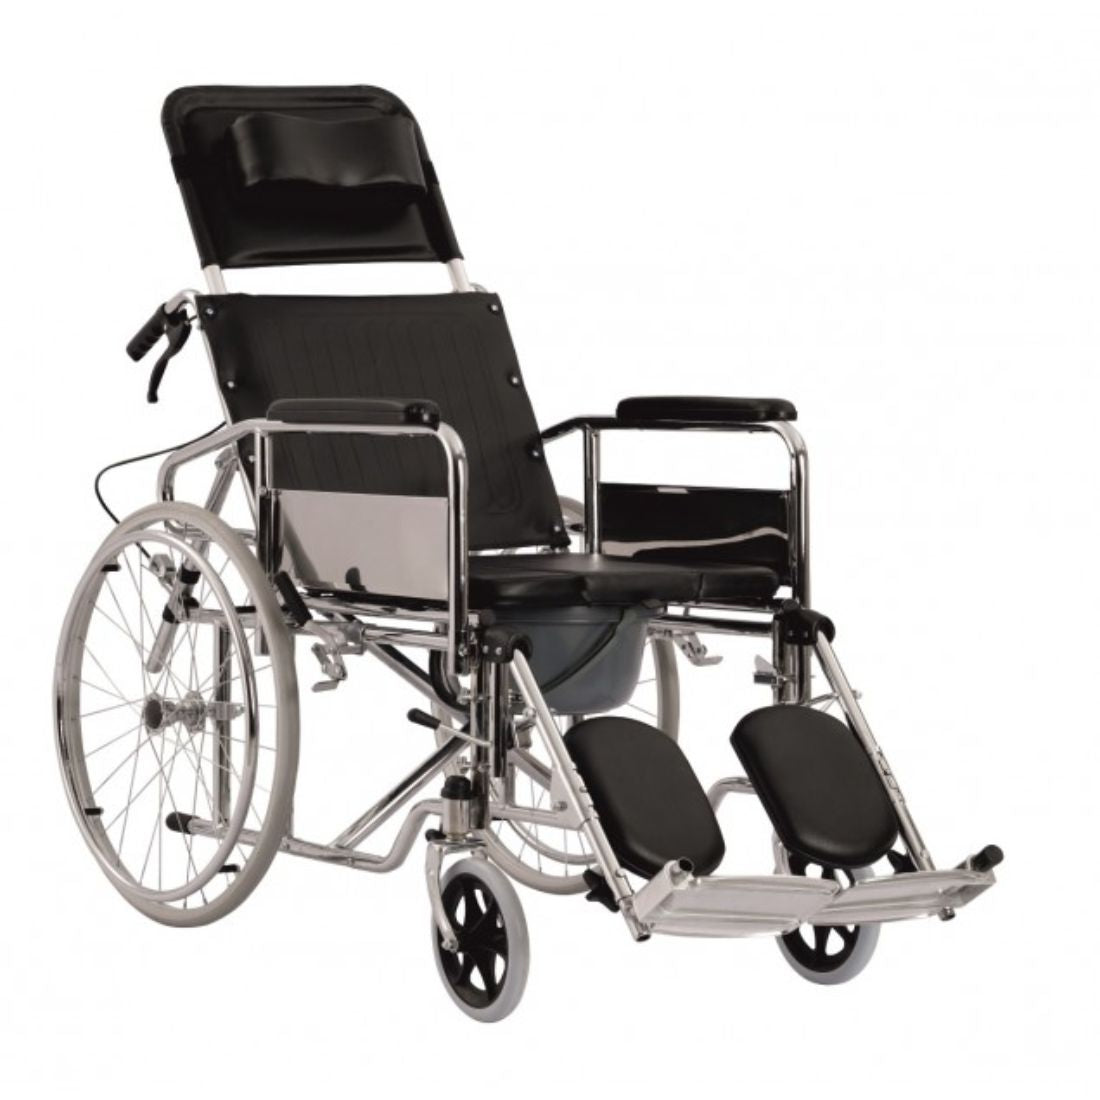 Recliner Wheelchair with U Cut Seat & Commode/Toilet Pot - Foldable Reclining Wheelchair